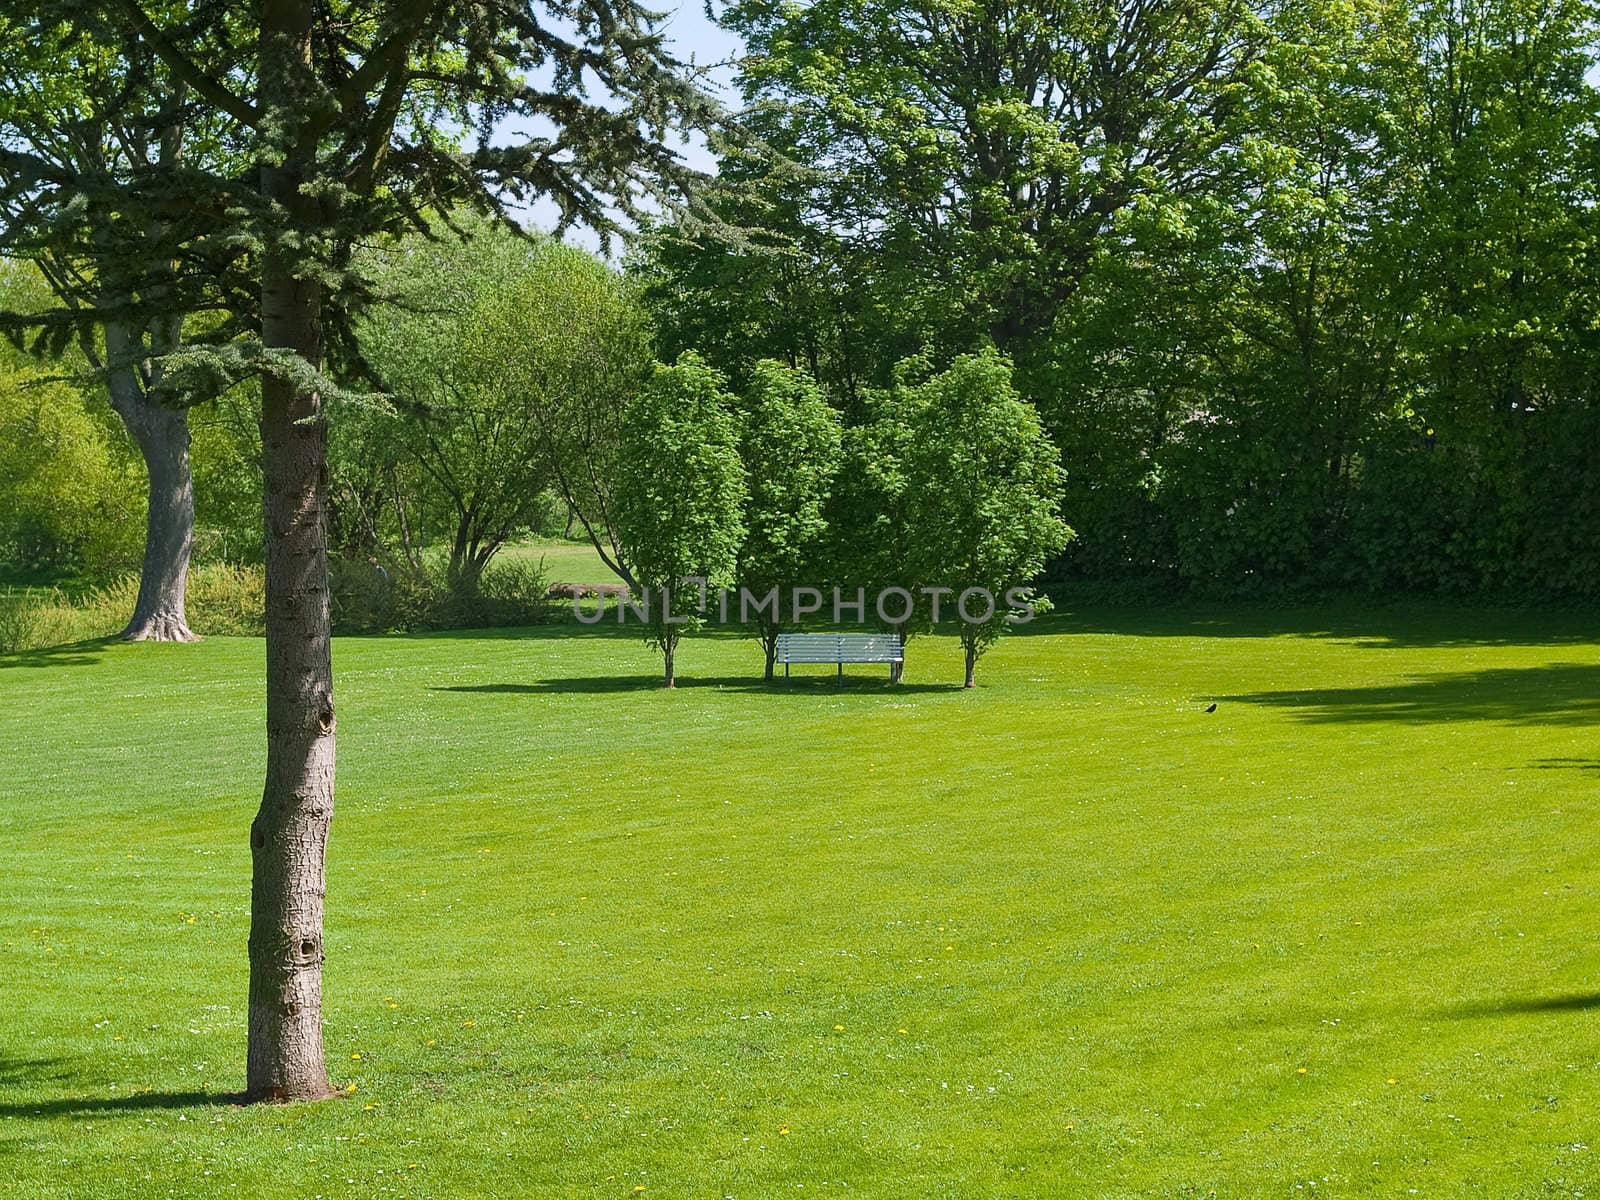 Single romantic wooden bench in a city park with wide green lawn